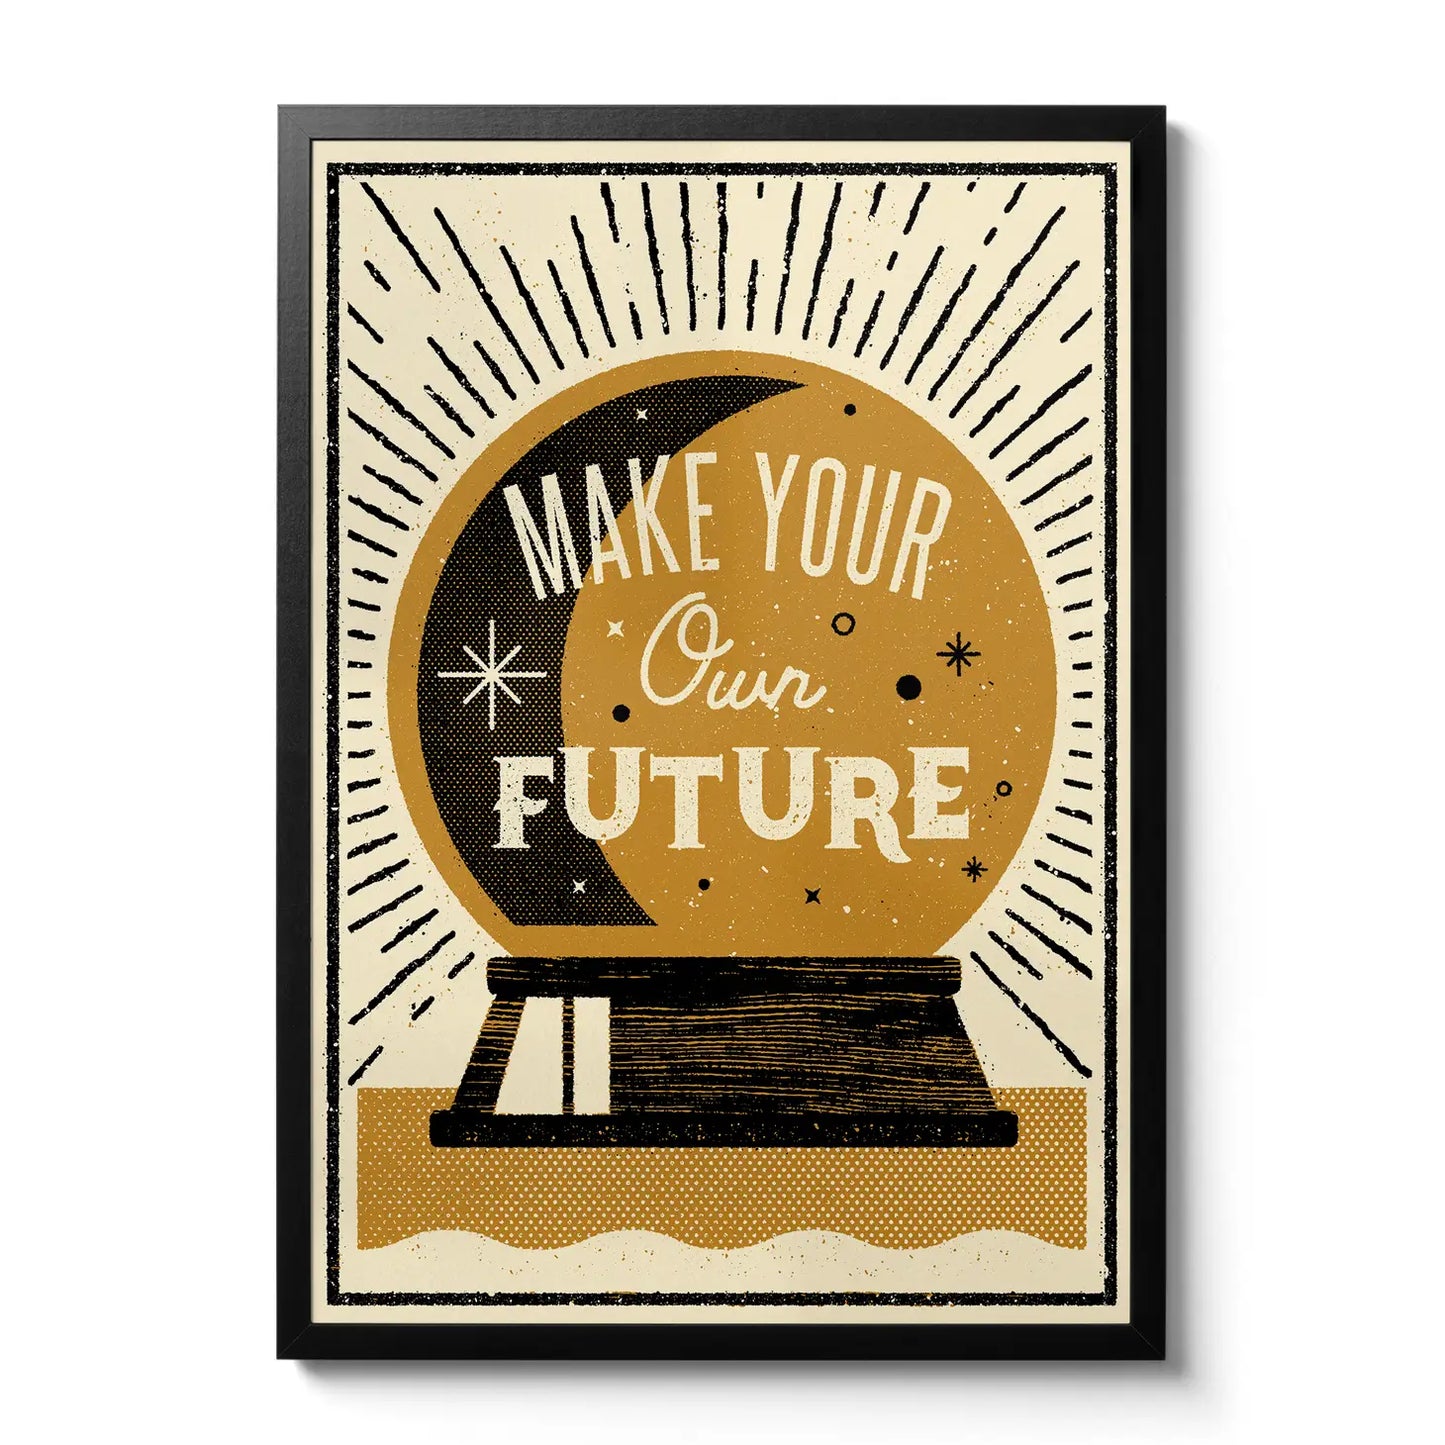 Make your own future A3 print